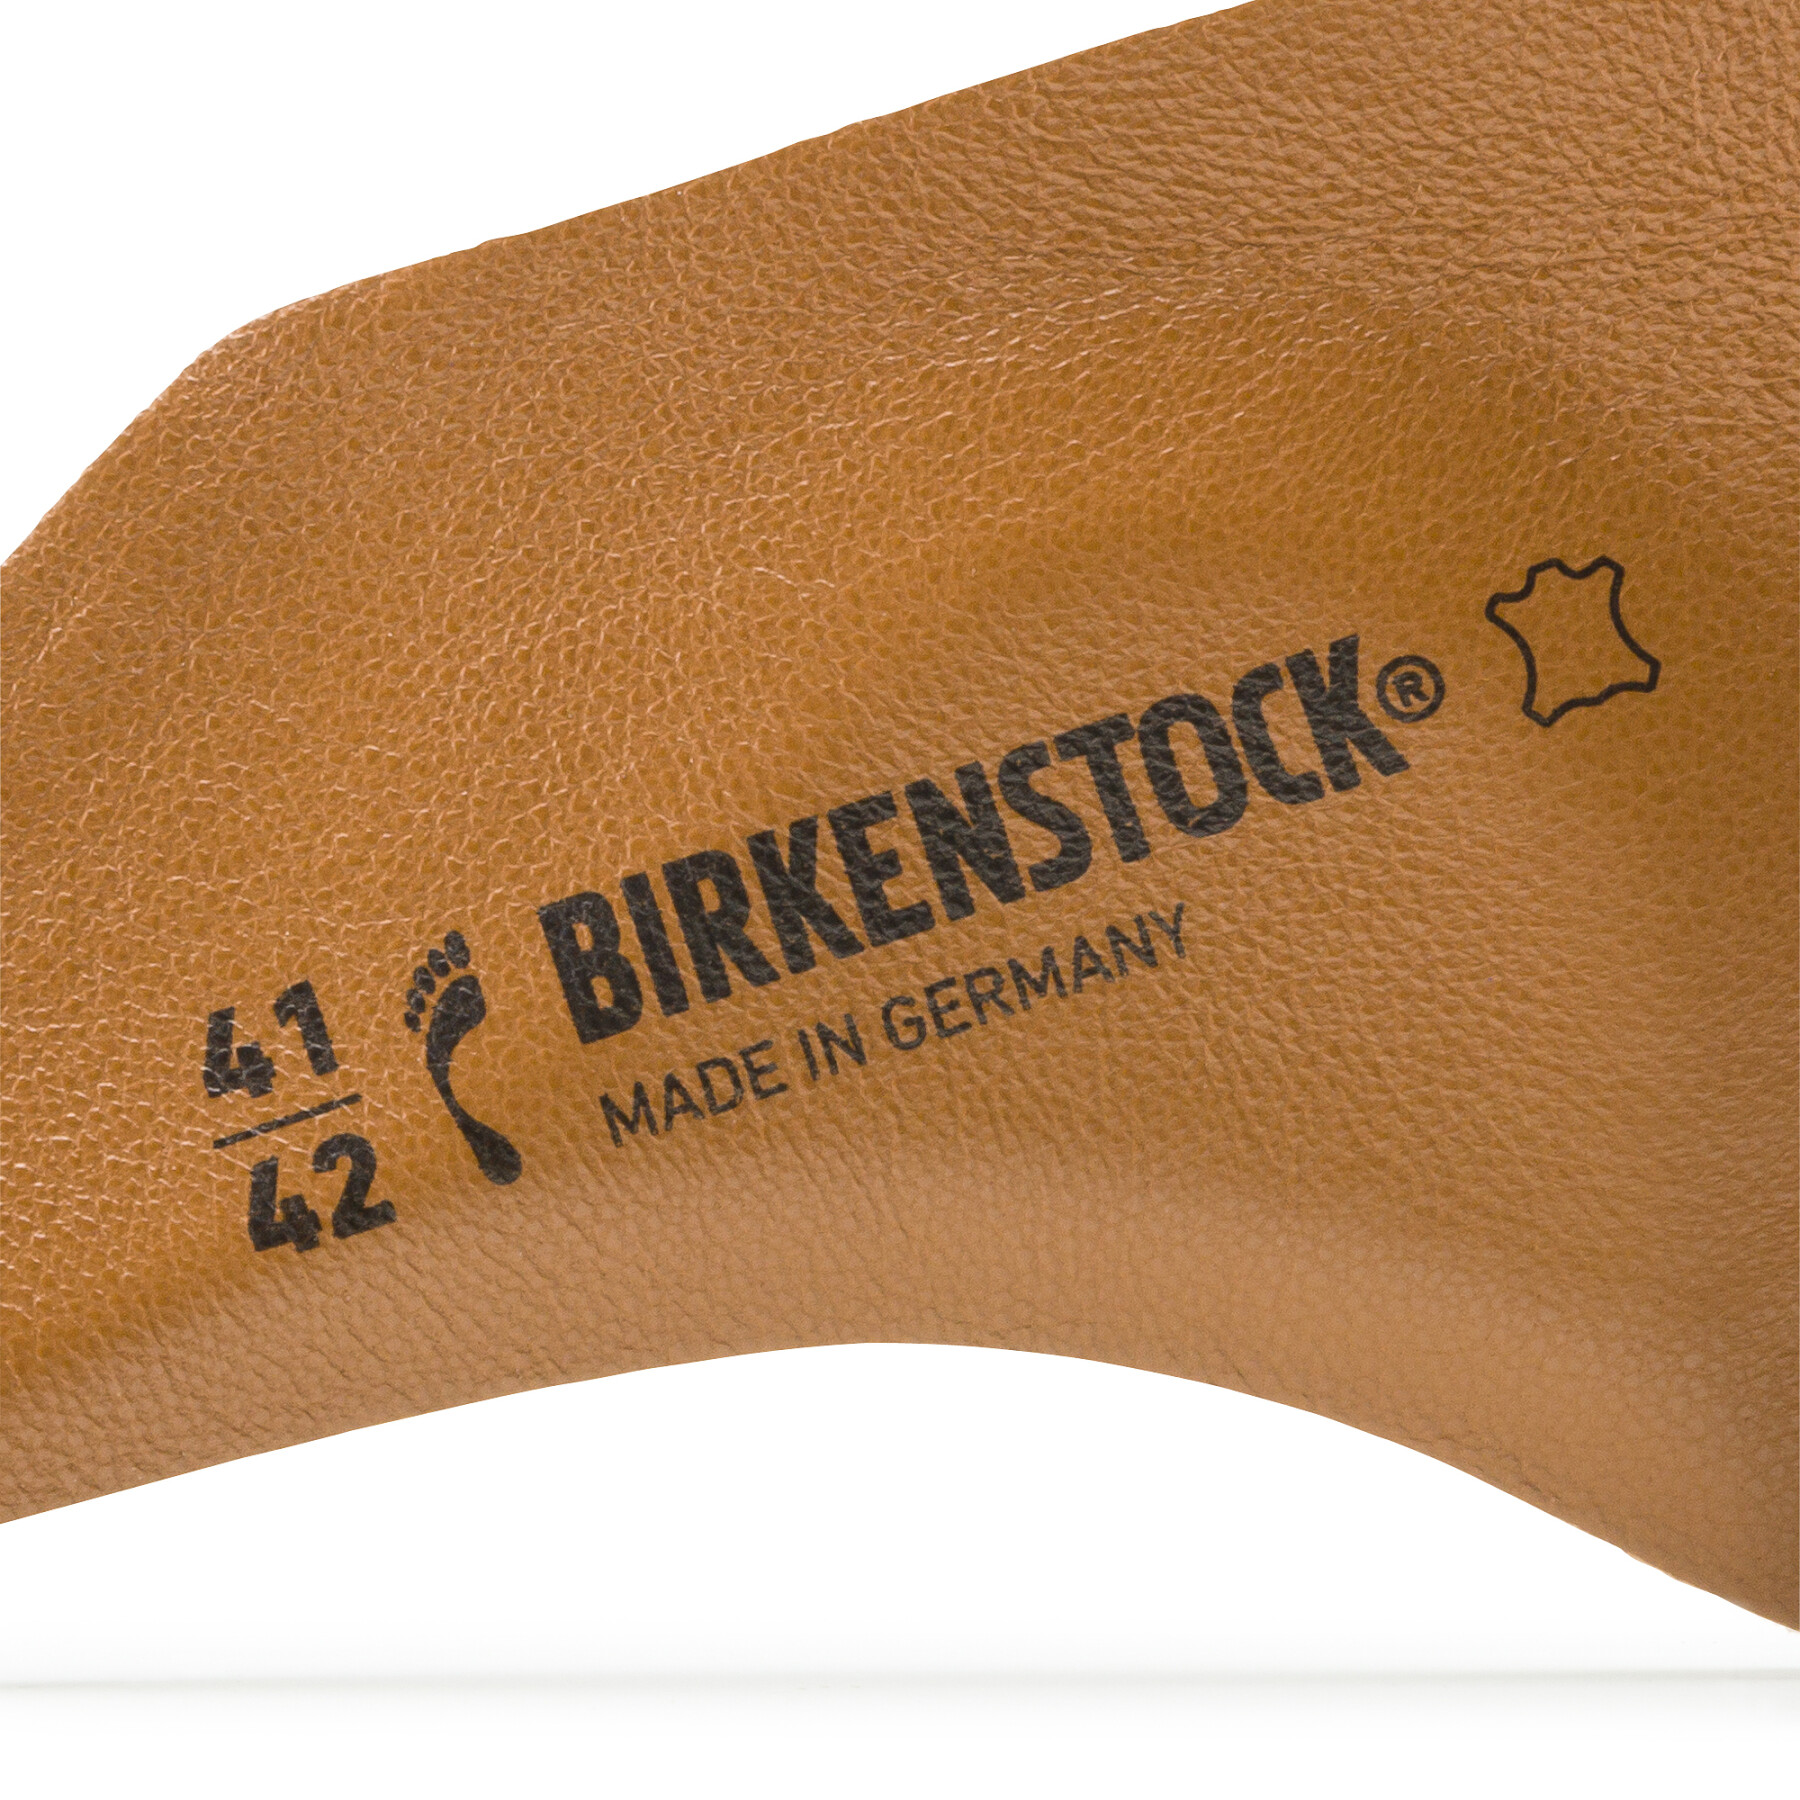 Suole strette Birkenstock Star Leather Lined Natural Leather